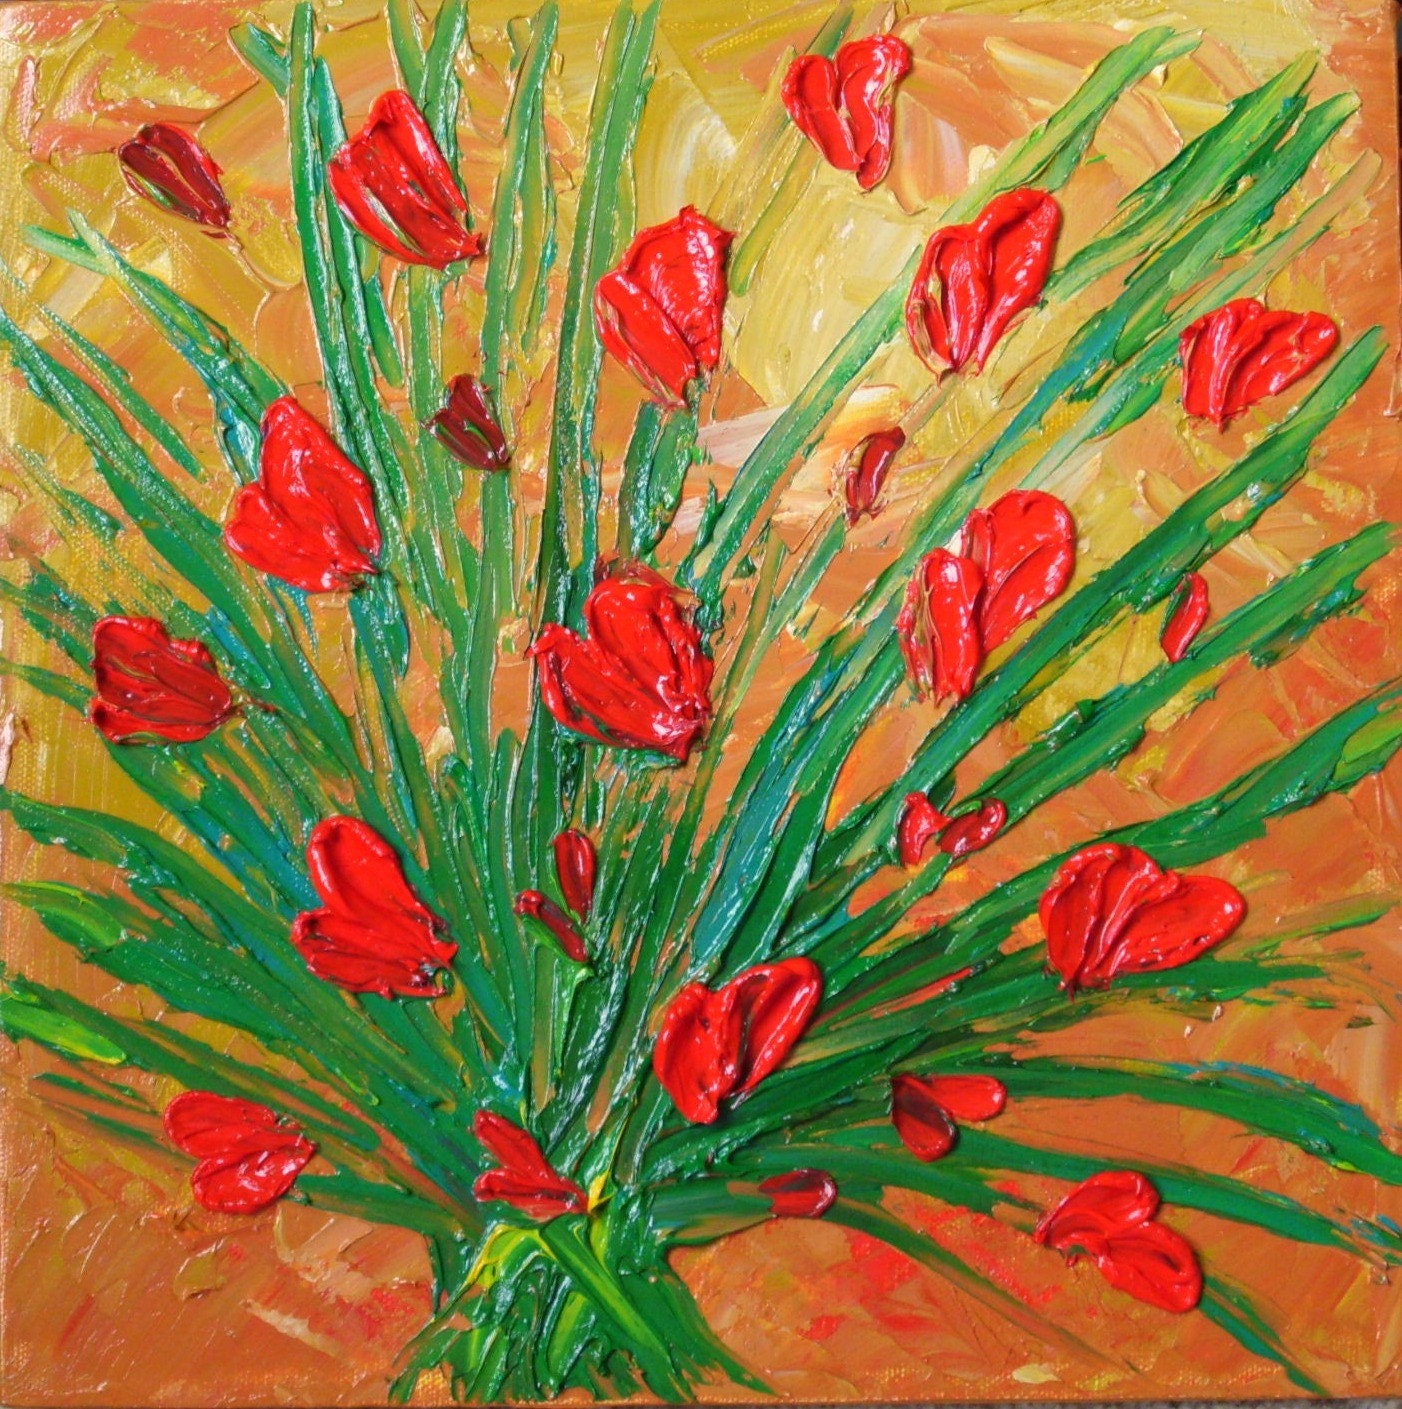 Weekend 25% Off Sale Original Impasto Textured Oil Painting on Canvas 12x12 Red Tulips